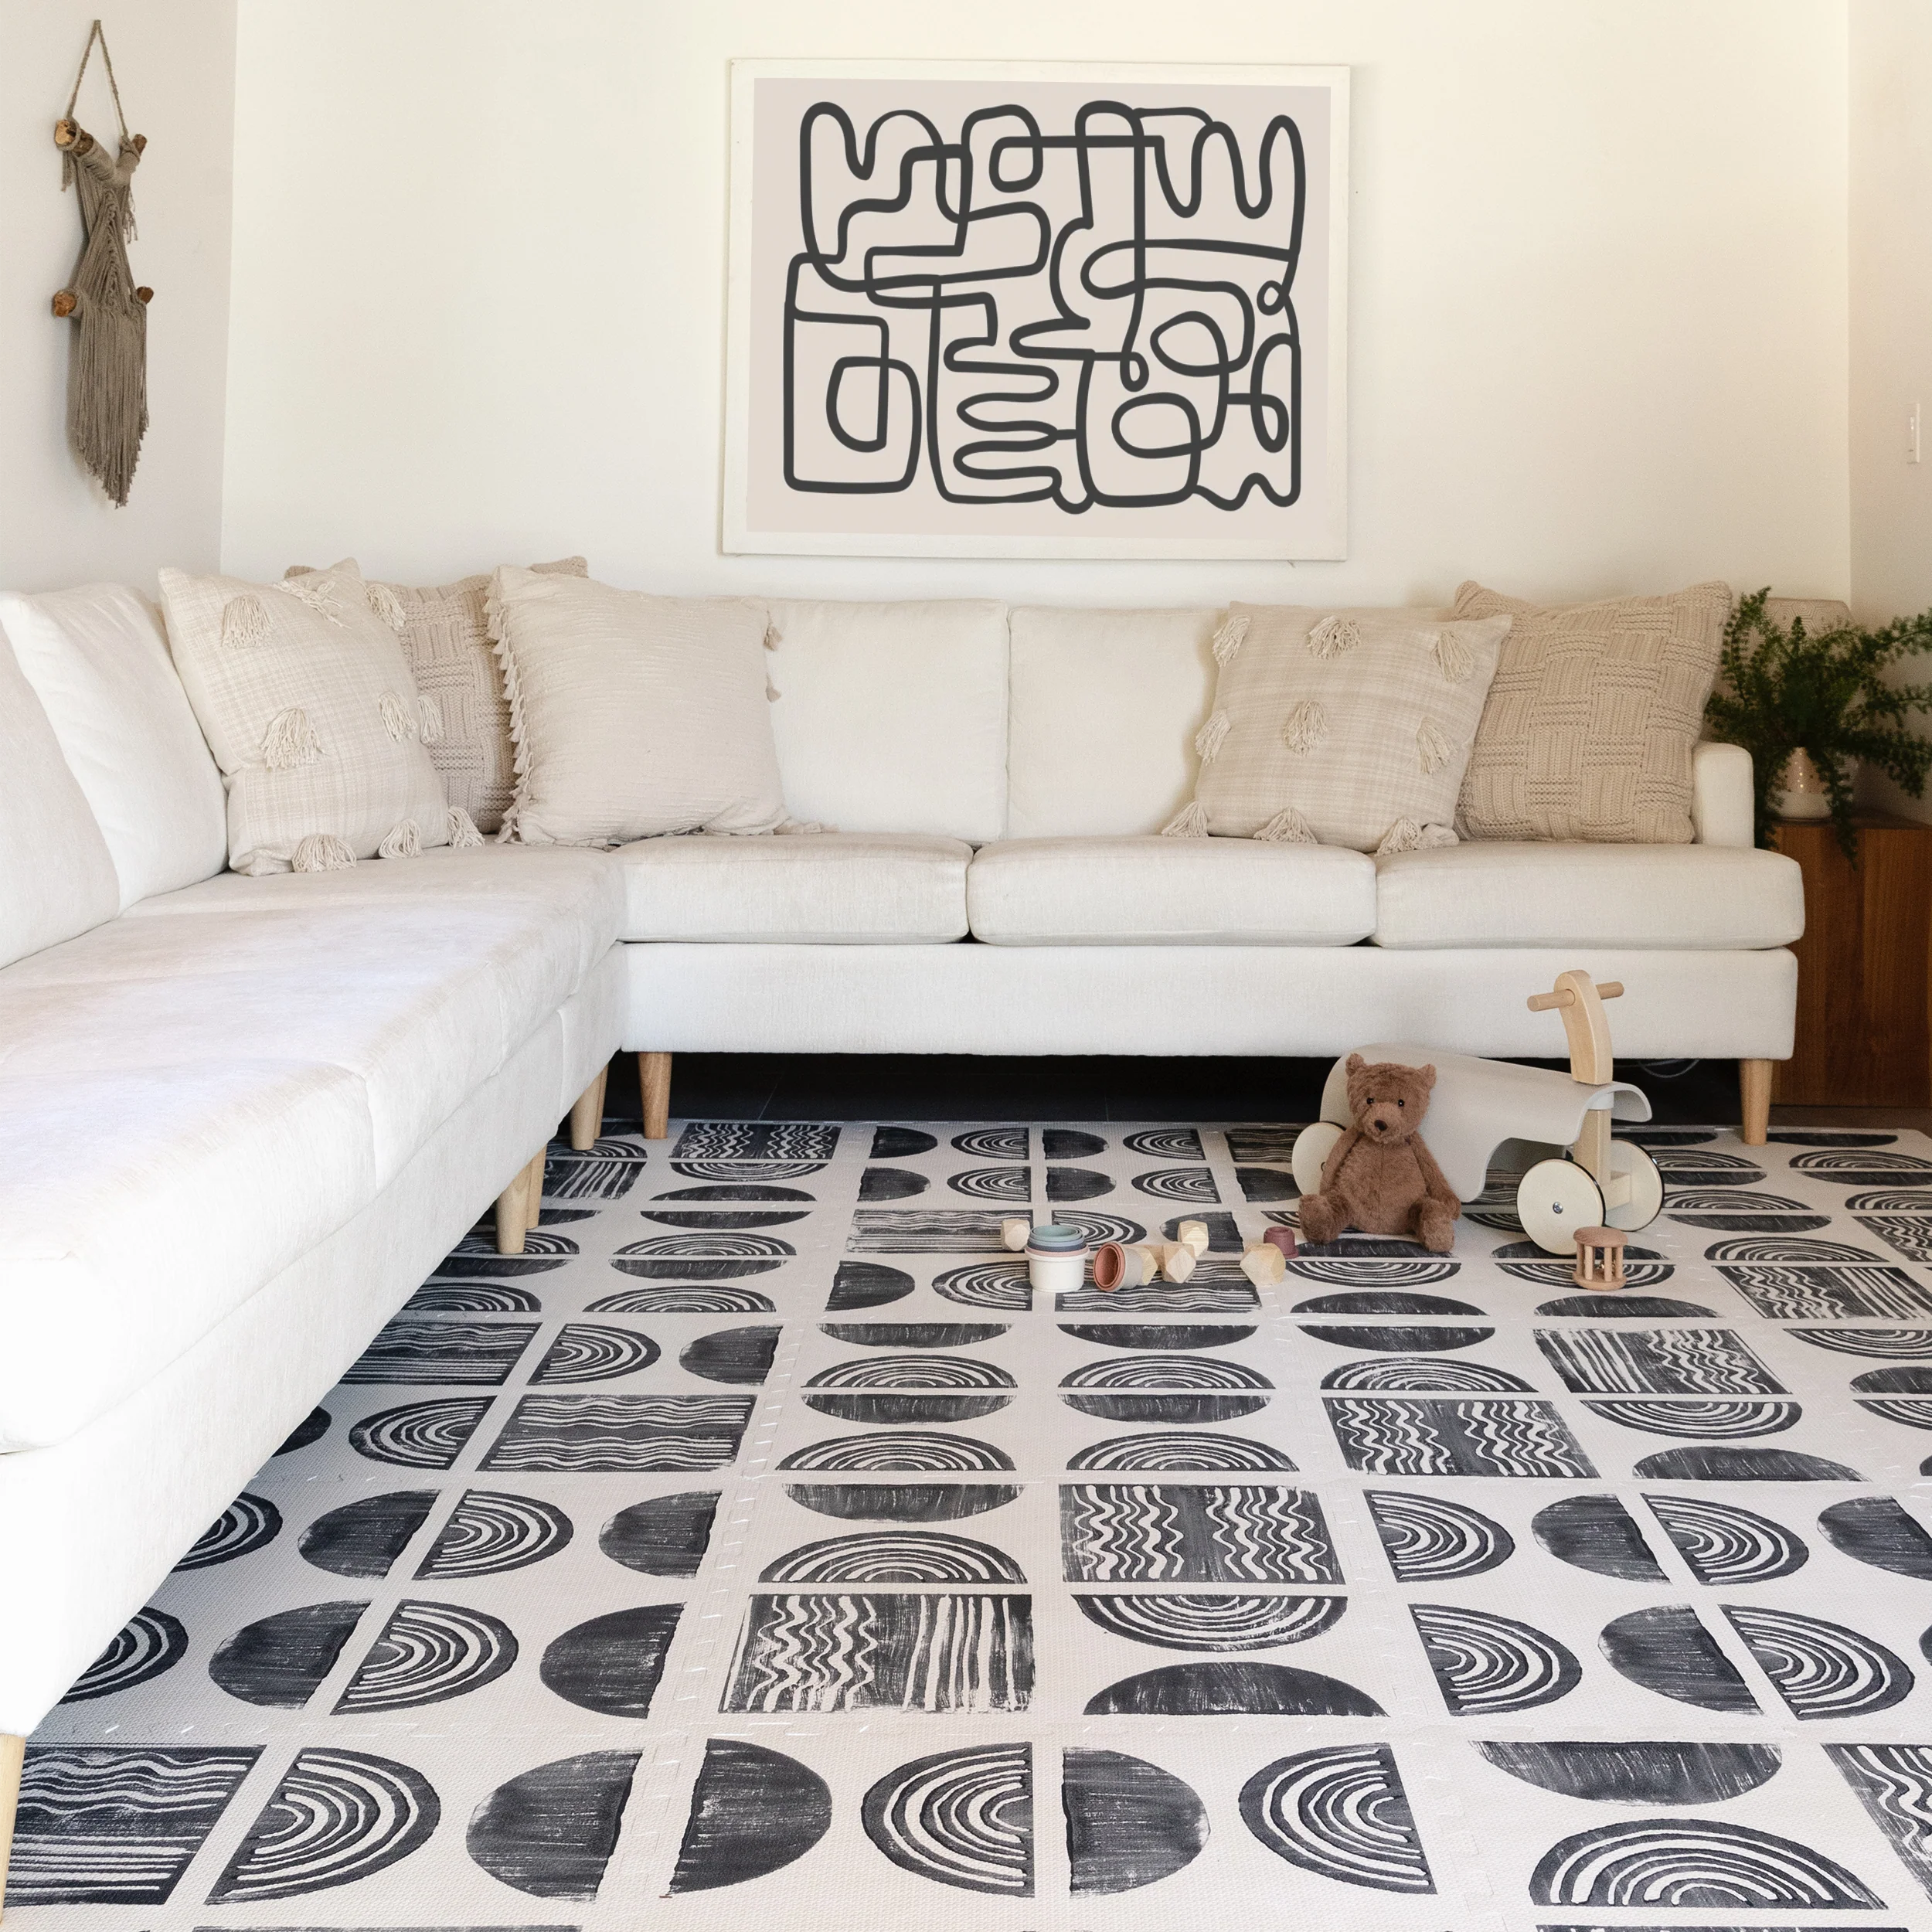 Ada modern minimalist baby play mat in Char, black and off white. Shown in living room with baby toys.